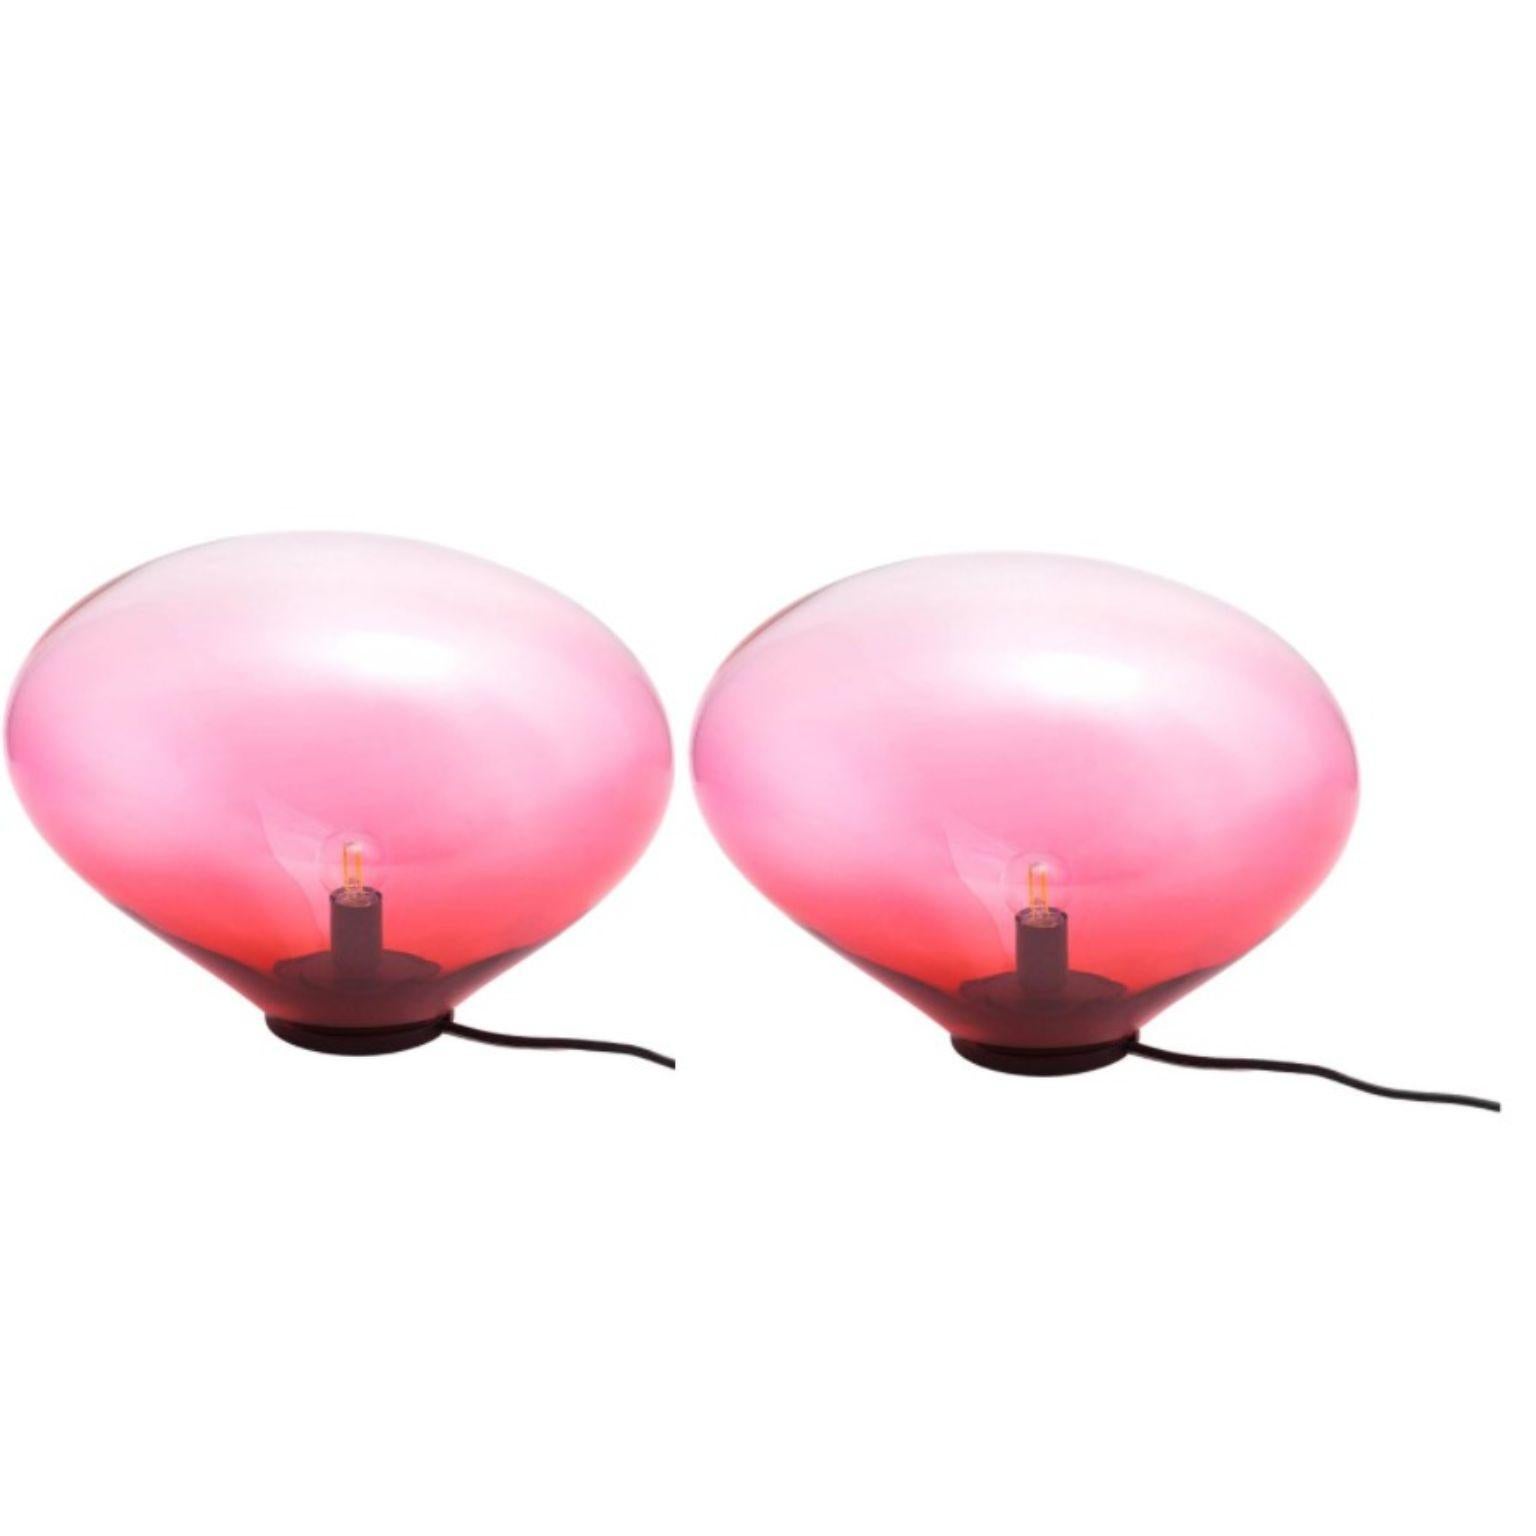 Set of 2 Sedna Brillant Ruby M Table Lamps by Eloa
No UL listed 
Material: glass, steel, silver, LED Bulb
Dimensions: D 25 x W 38 x H 28 cm
Also available in different colours and dimensions.

All our lamps can be wired according to each country. If